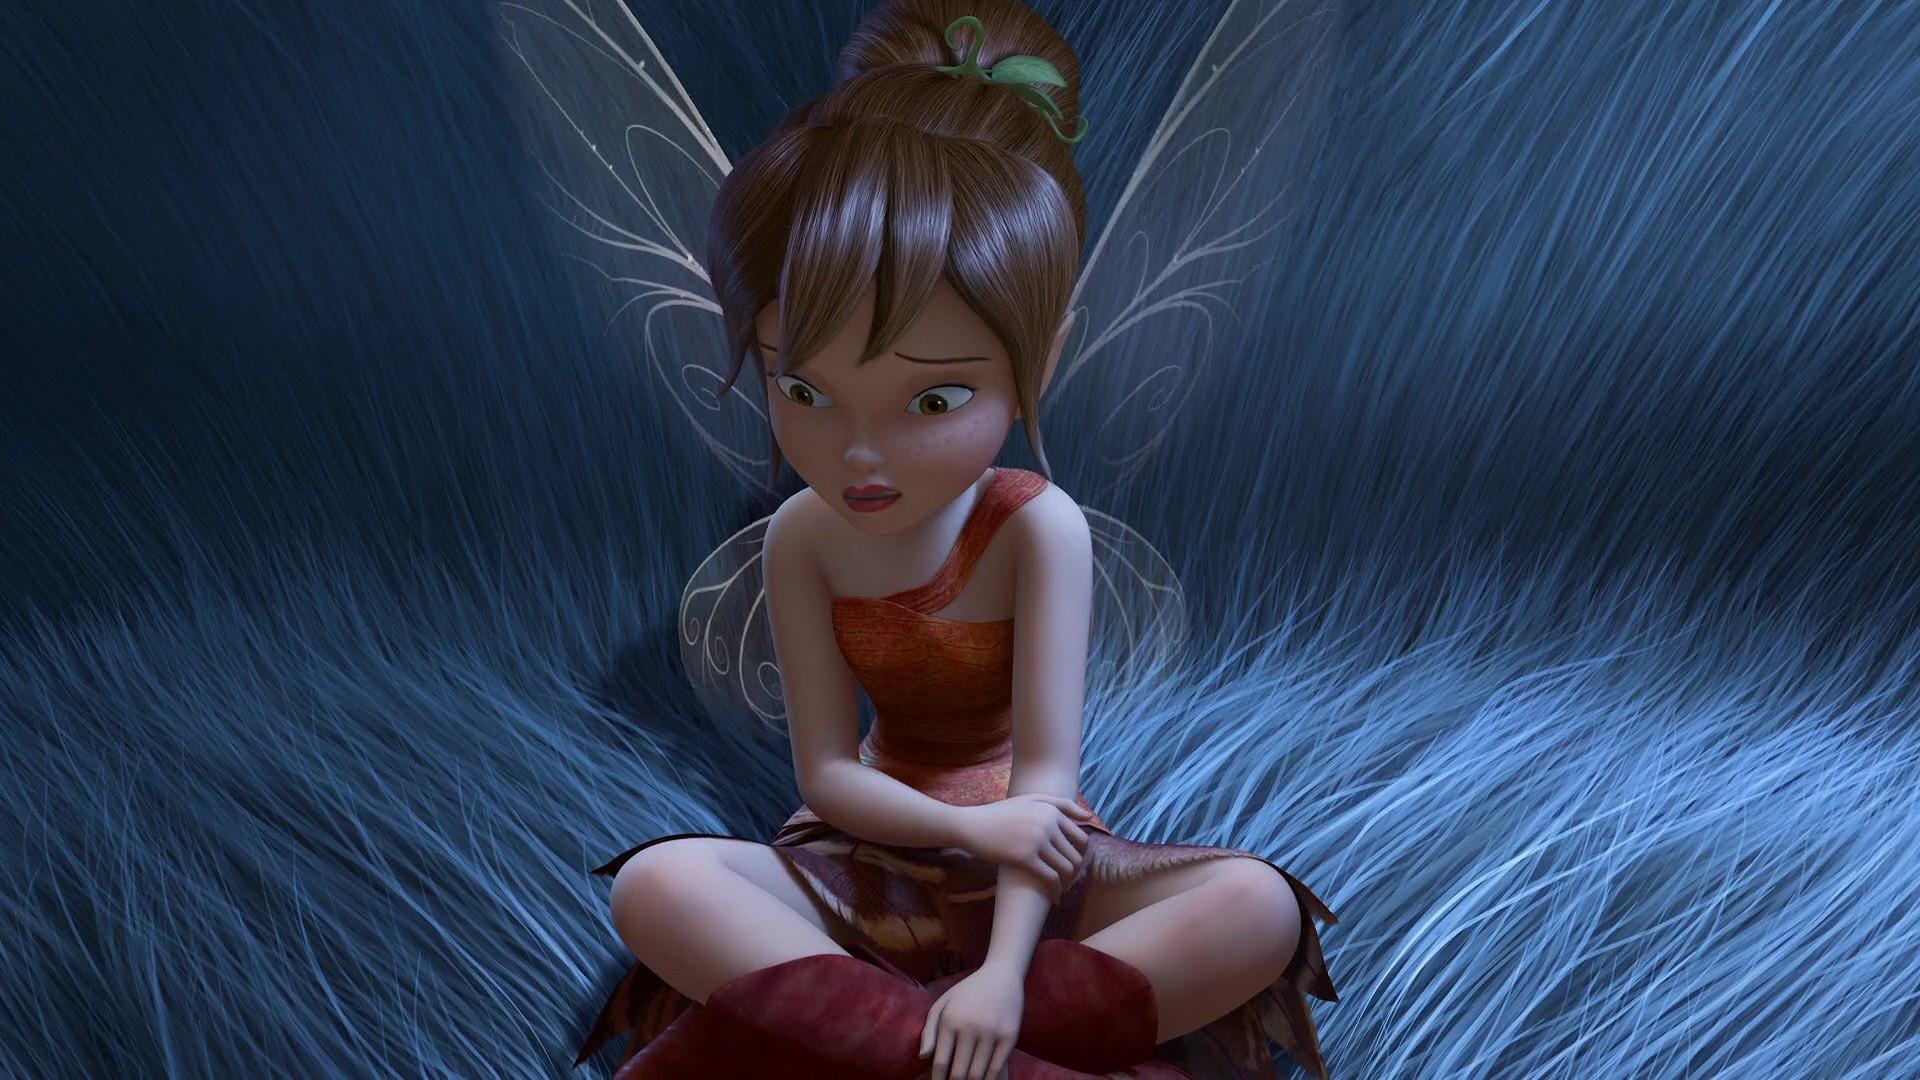 HD wallpaper, Animated Movies, Tinkerbell, Movies